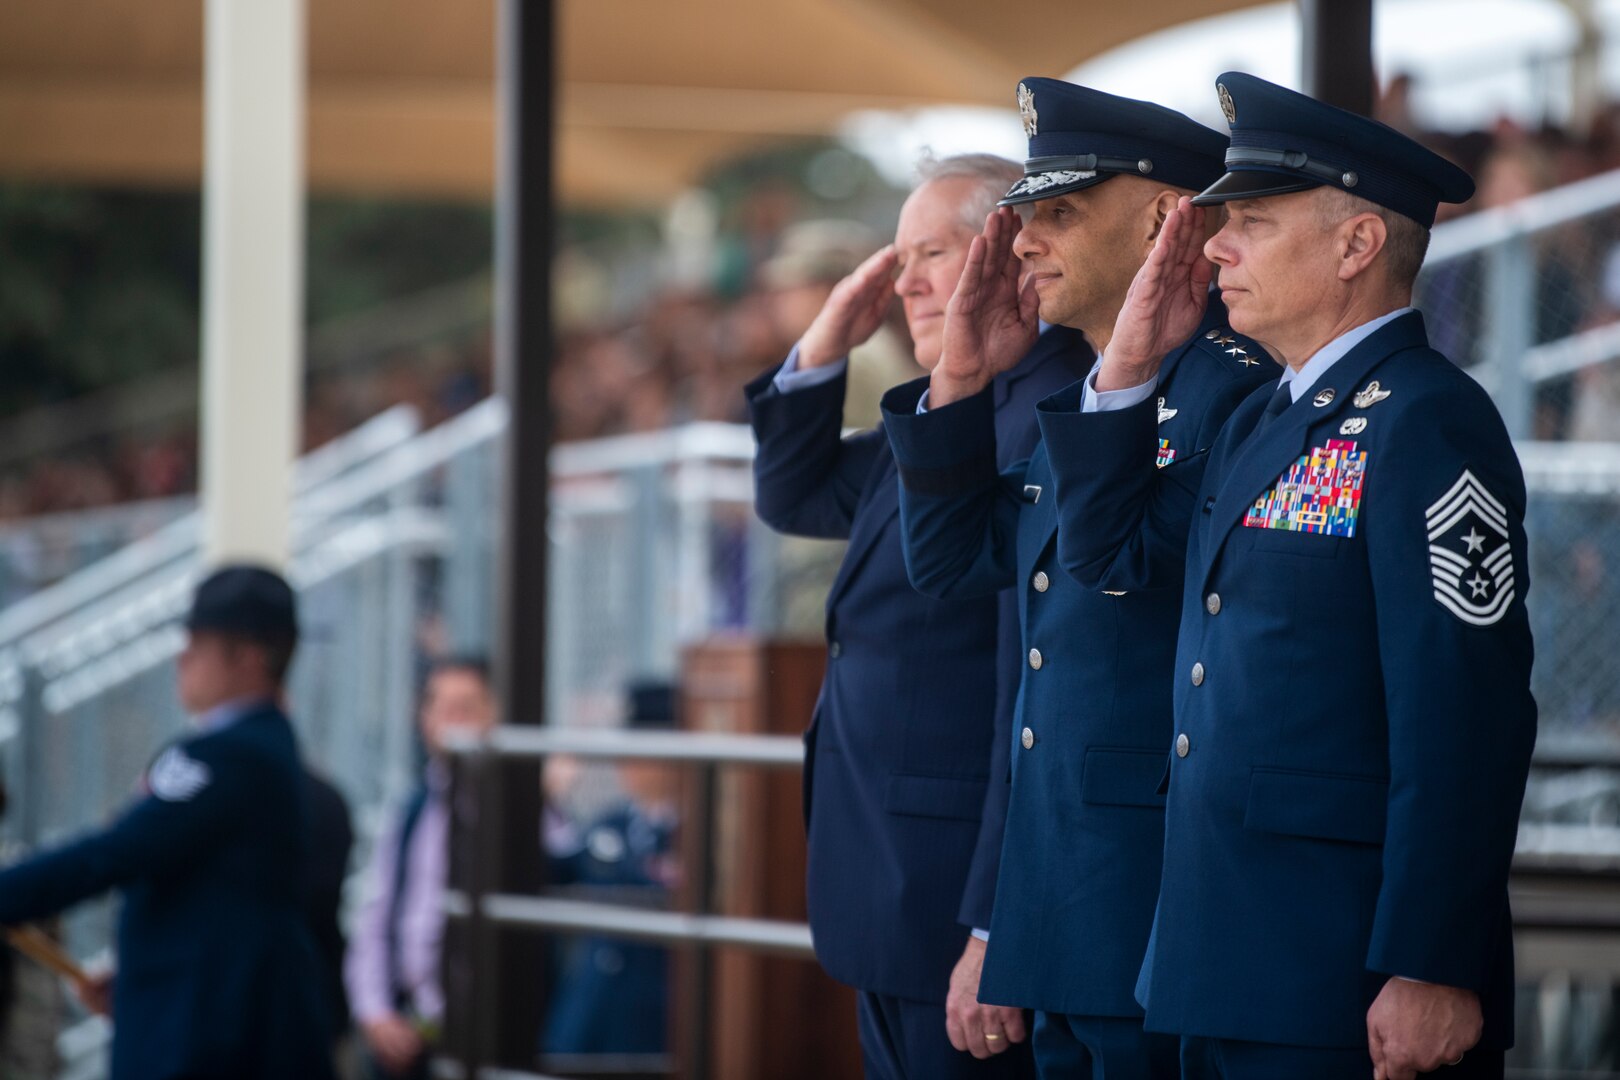 Secretary of the Air Force Frank Kendall, left, salutes the U.S. flag with Lt. Gen. Brian Robinson, center, commander of Air Education and Training Command, and Chief Master Sgt. Erik Thompson, right, AETC command chief, during the playing of the national anthem at the start of a U.S. Air Force Basic Military Training graduation ceremony at Joint Base San Antonio-Lackland, Texas, Nov. 3, 2022